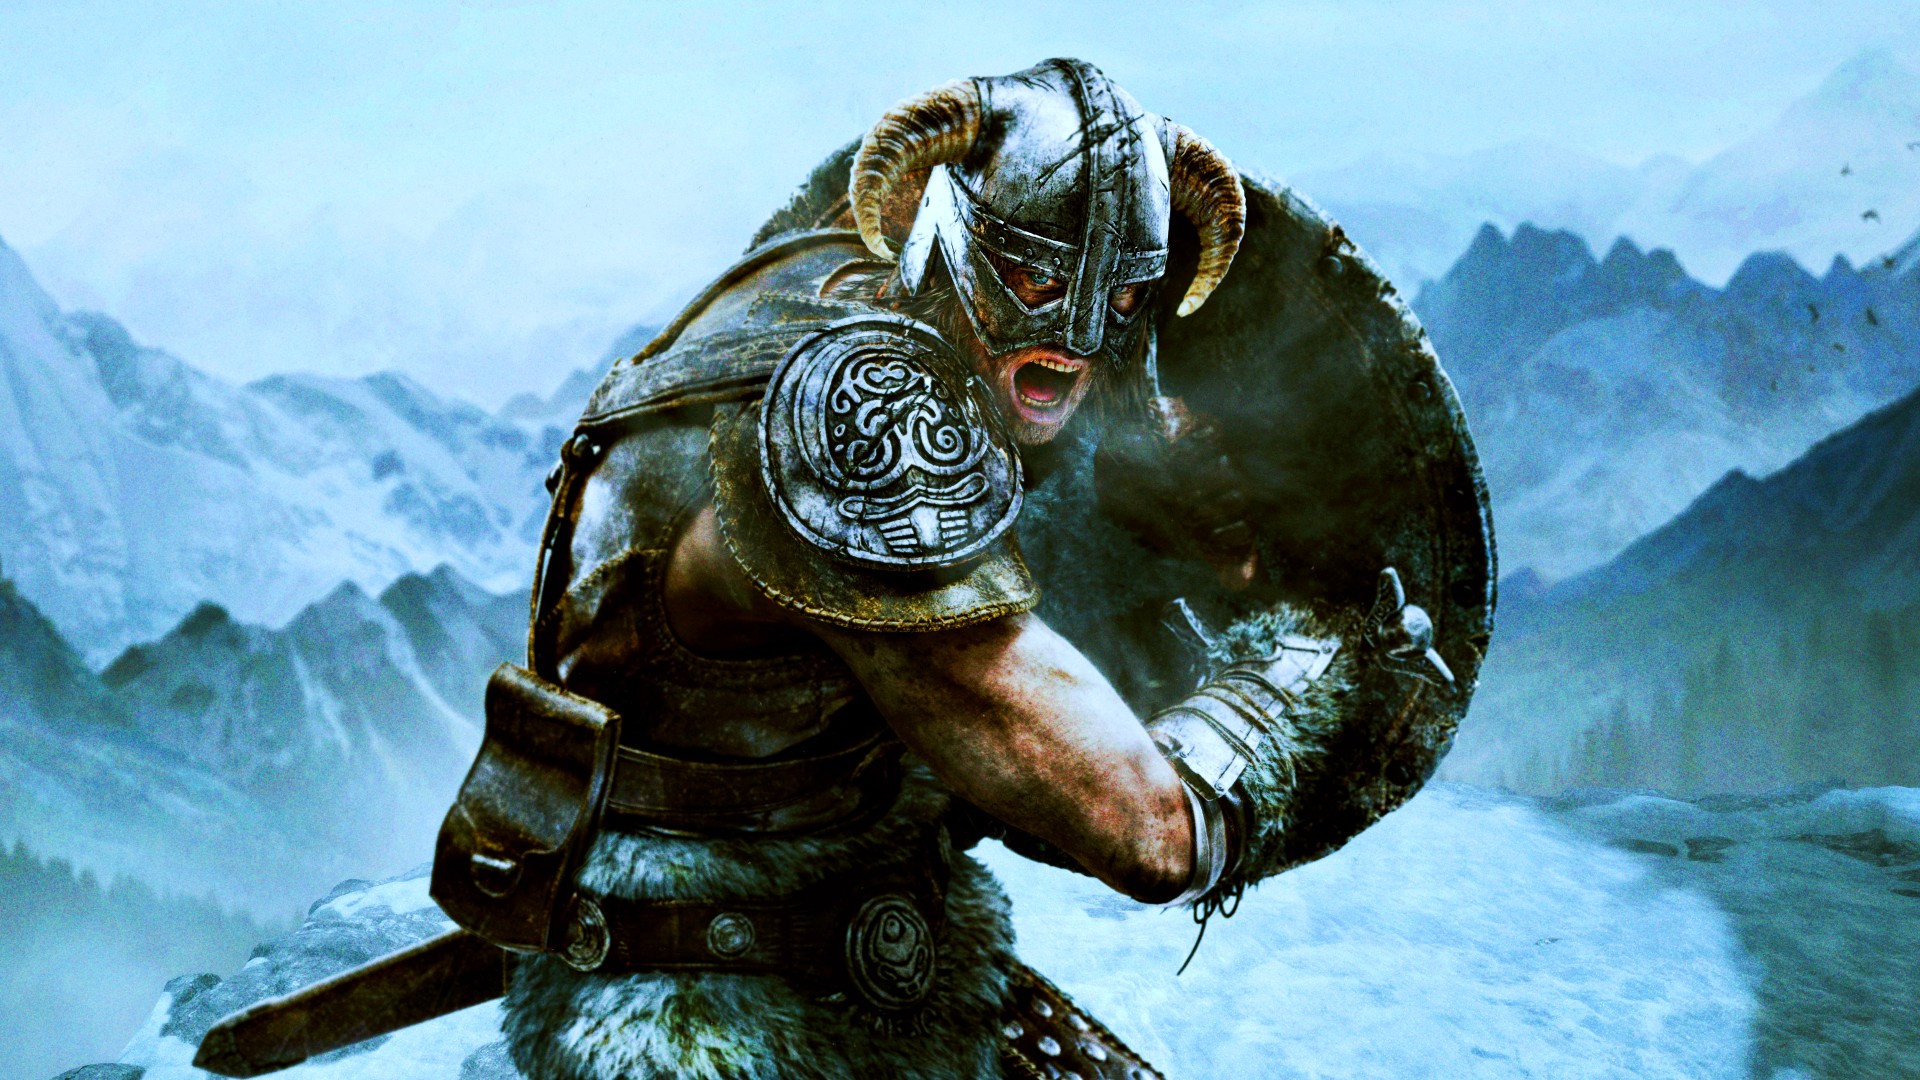 Skyrim mod lets you give up being an RPG hero, live dull Bethesda life